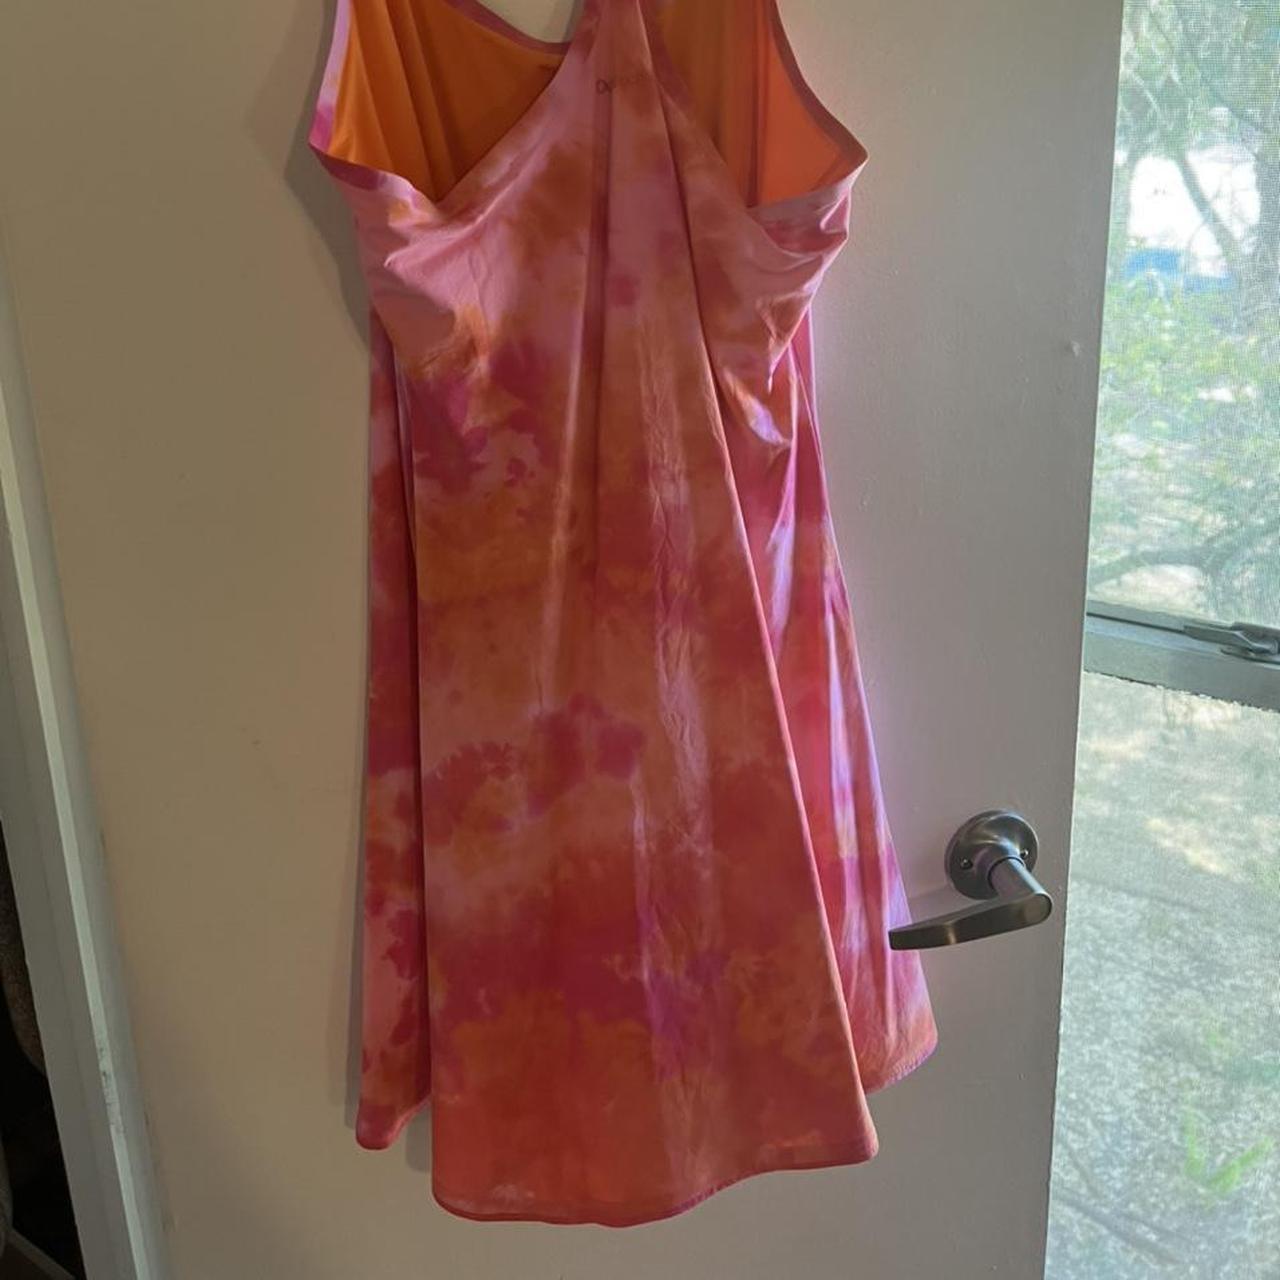 Outdoor Voices The Exercise Dress in Orange Pink Tie